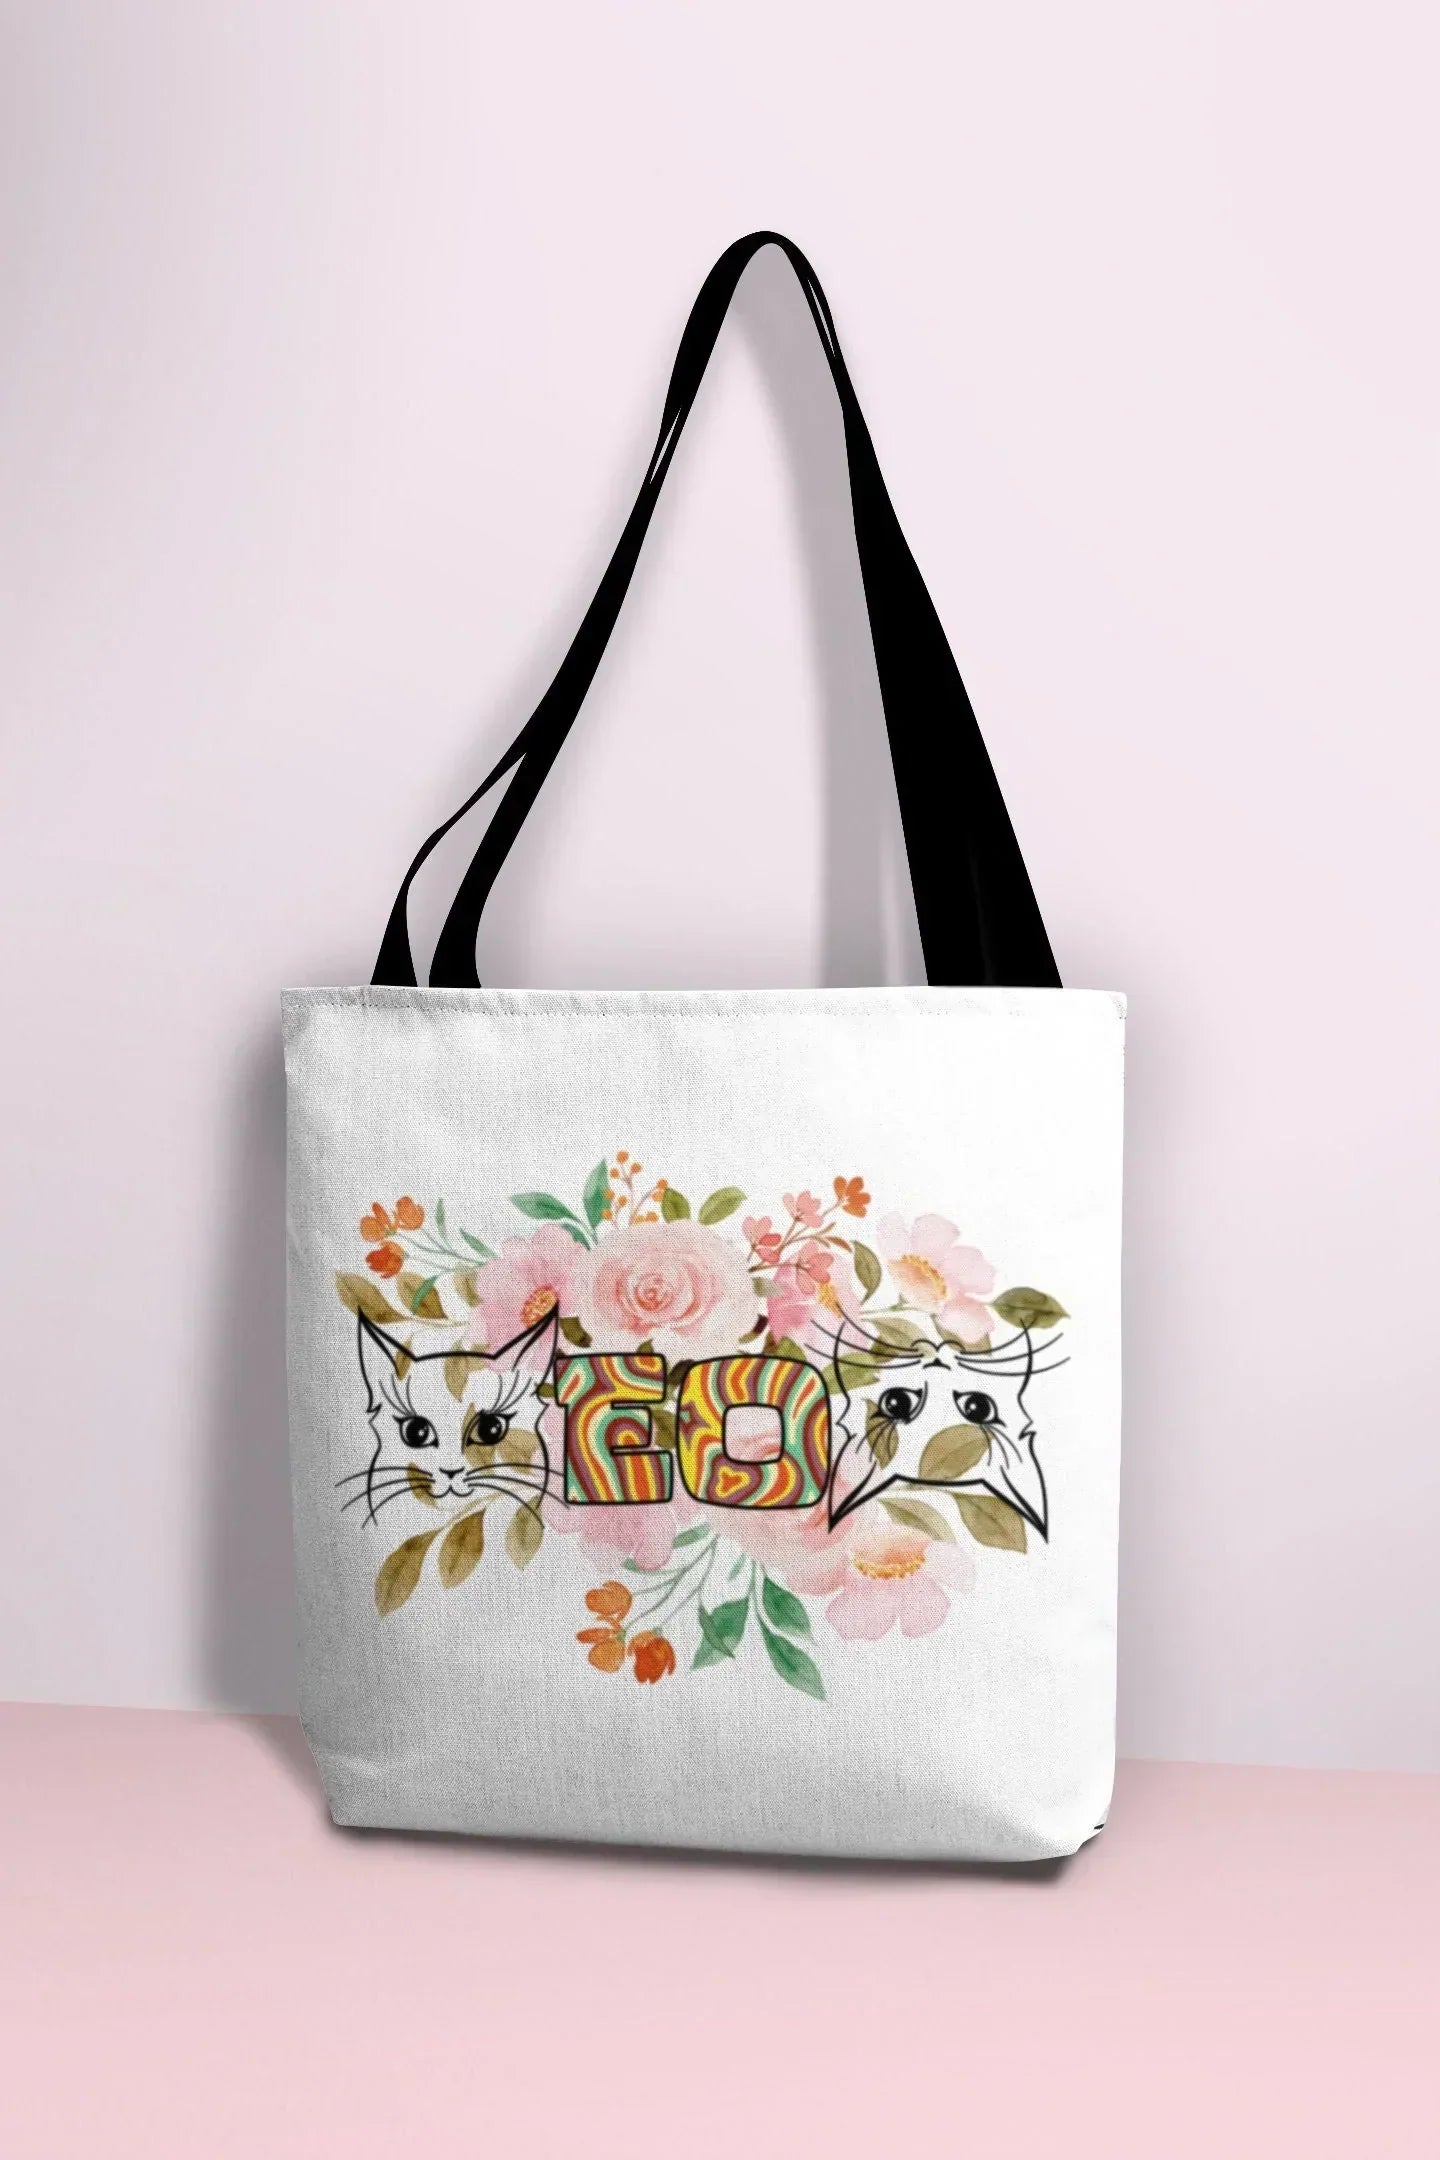 Cat Tote Bag, Aesthetic Tote Bag with Pockets, Hippie Cat Lovers Gift, Cat Mom Canvas Bag, Pro Choice Pro Feminism, Pussy Cat Themed Gifts